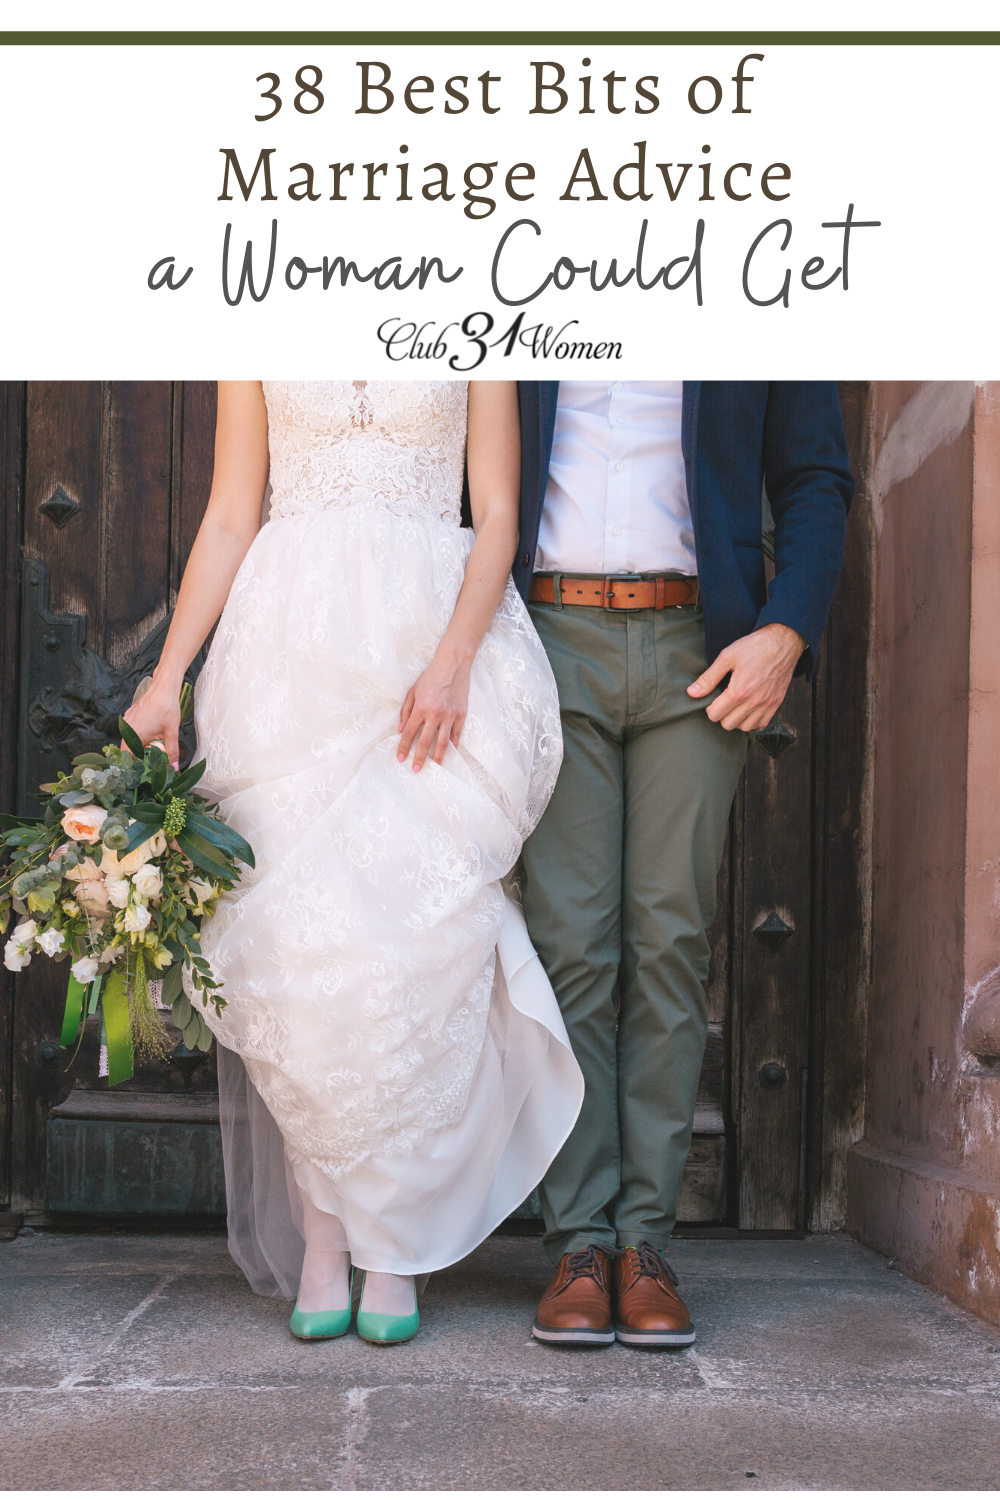 Are you looking for good marriage advice? Here's some of the best you'll ever find! Because we want to be good wives, and that requires some knowledge.... via @Club31Women